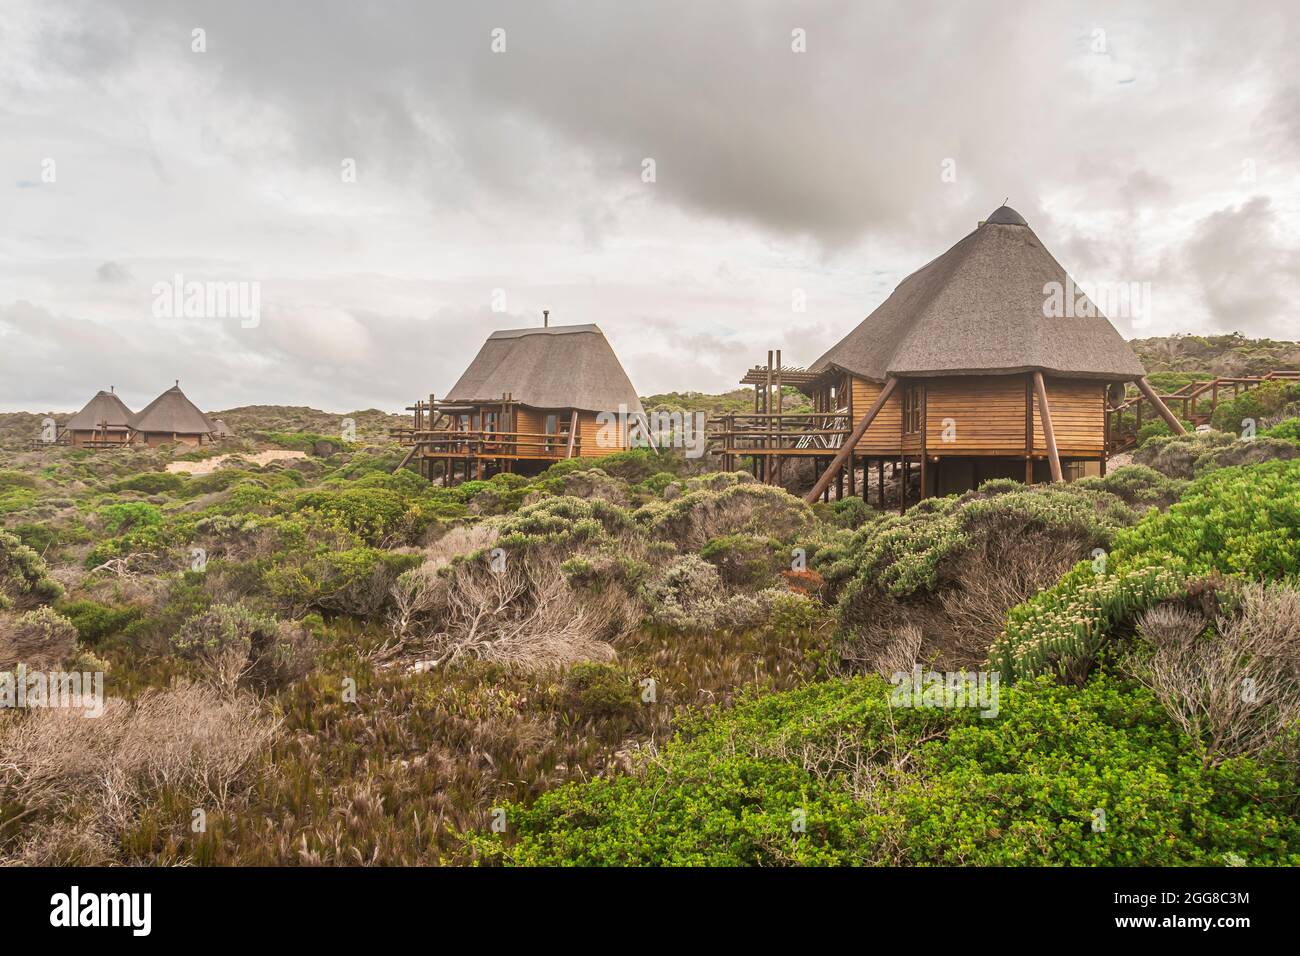 Chalets units build in African style architecture at Cape Agulhas National Park in South Africa which is the southernmost point of African Continent. Stock Photo